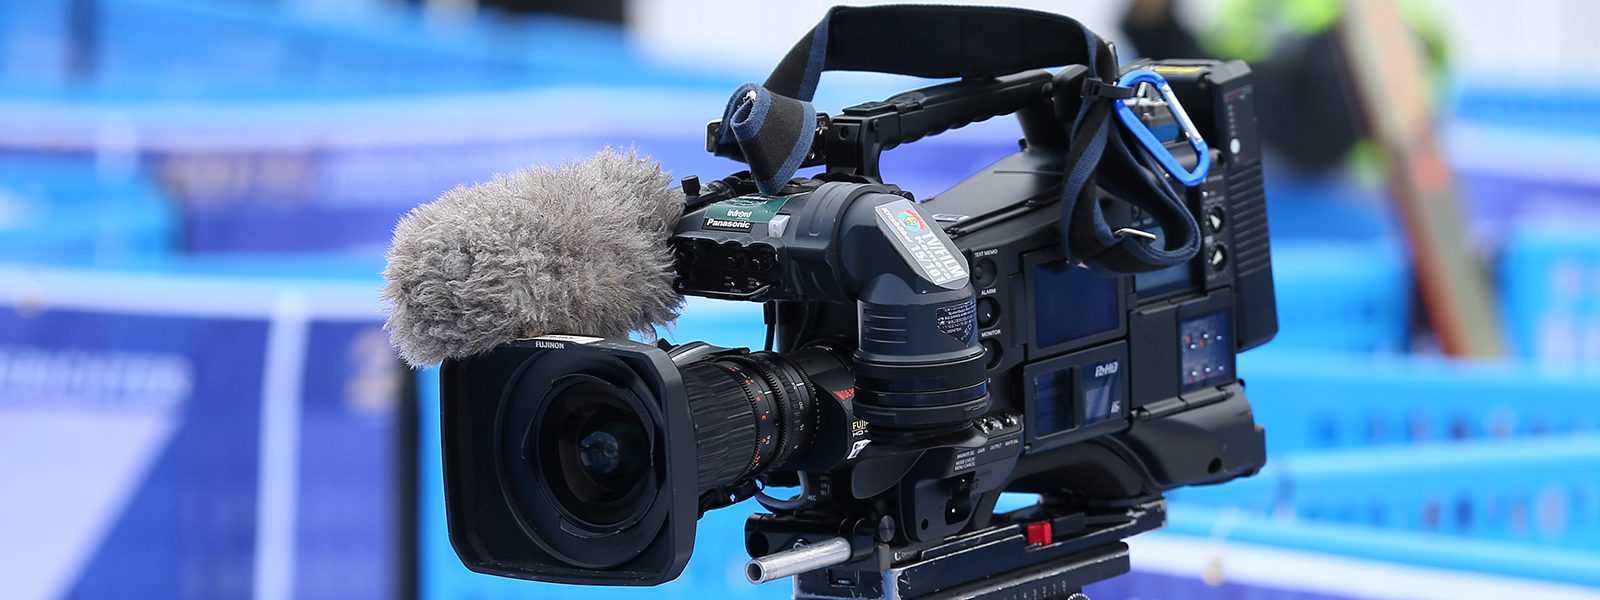 5 Things You Never Knew About World Cup TV Rights